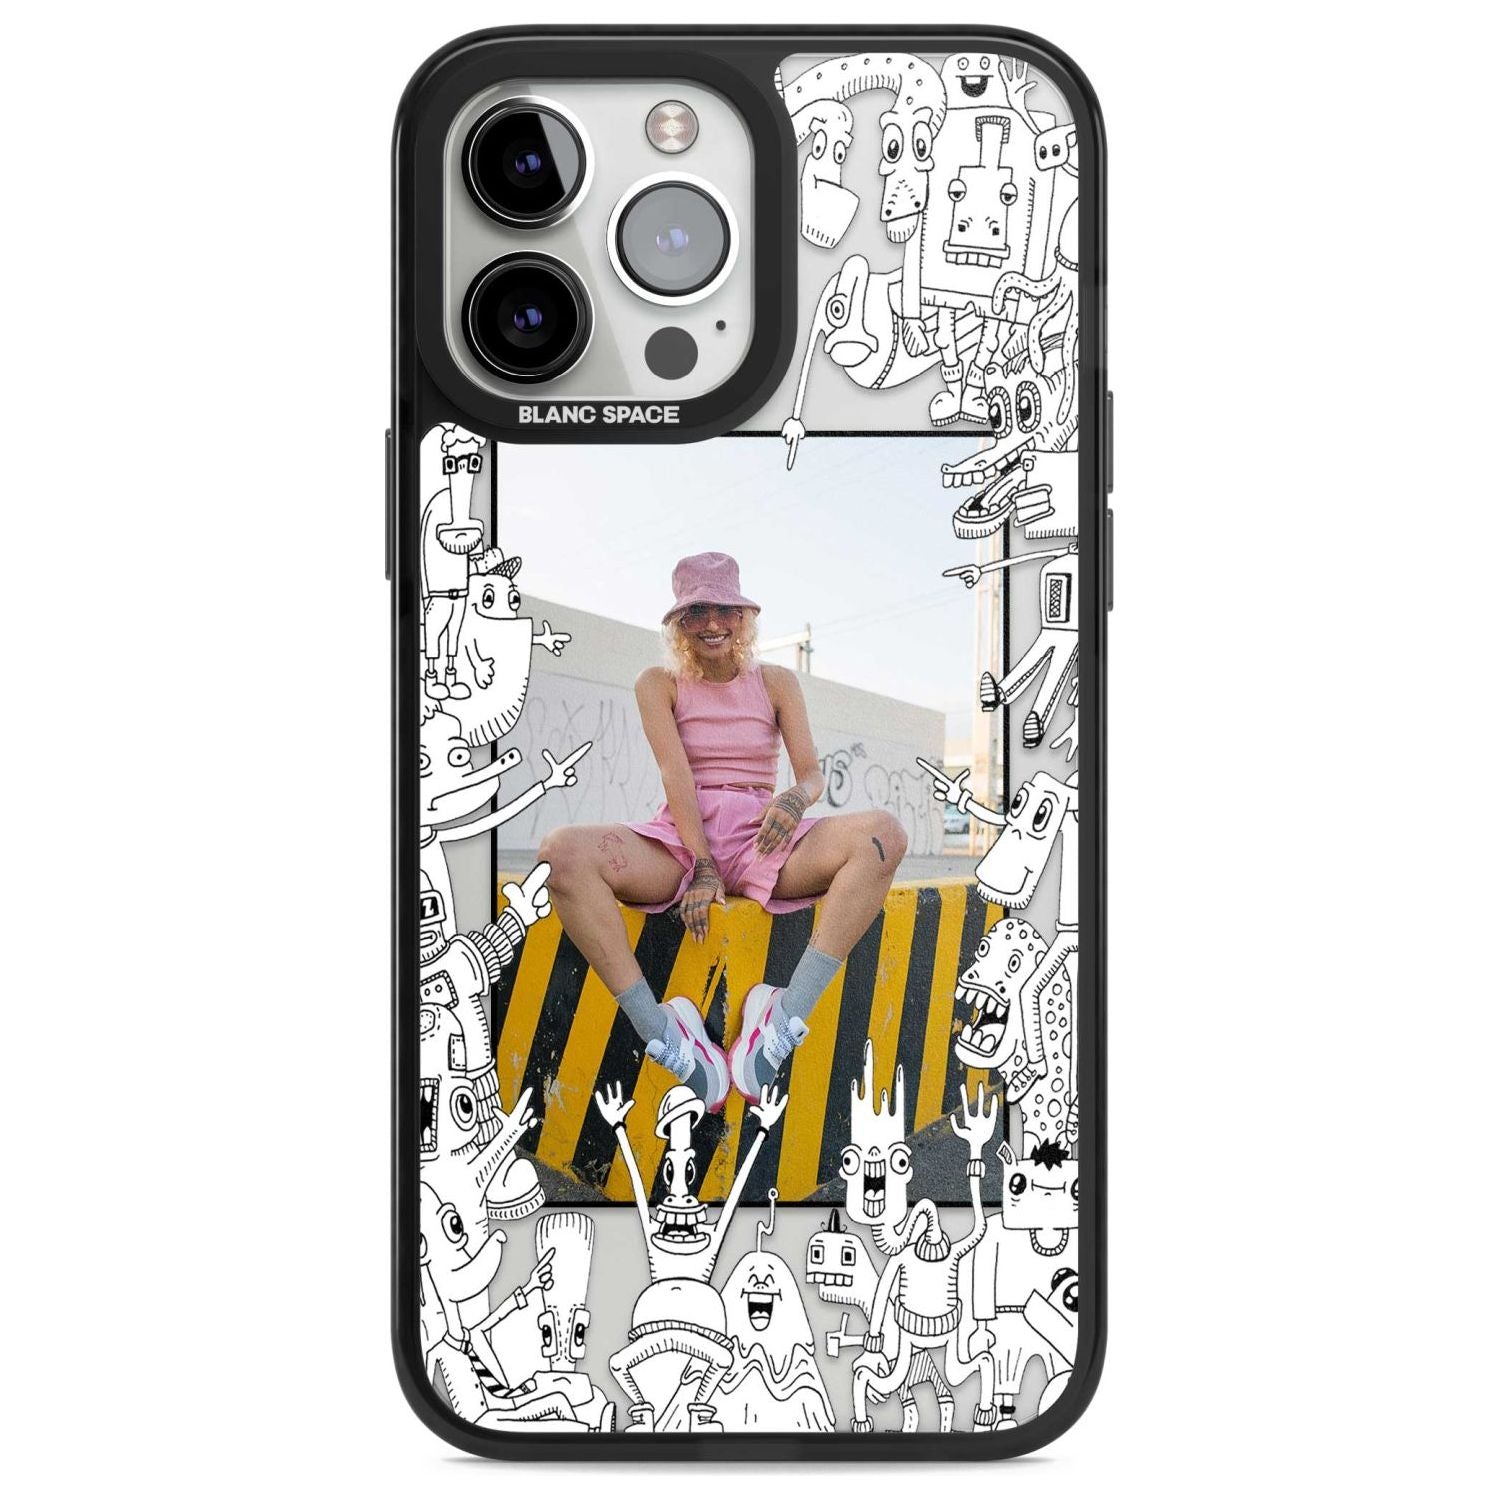 Personalised Look At This Photo Case Custom Phone Case iPhone 13 Pro Max / Magsafe Black Impact Case Blanc Space